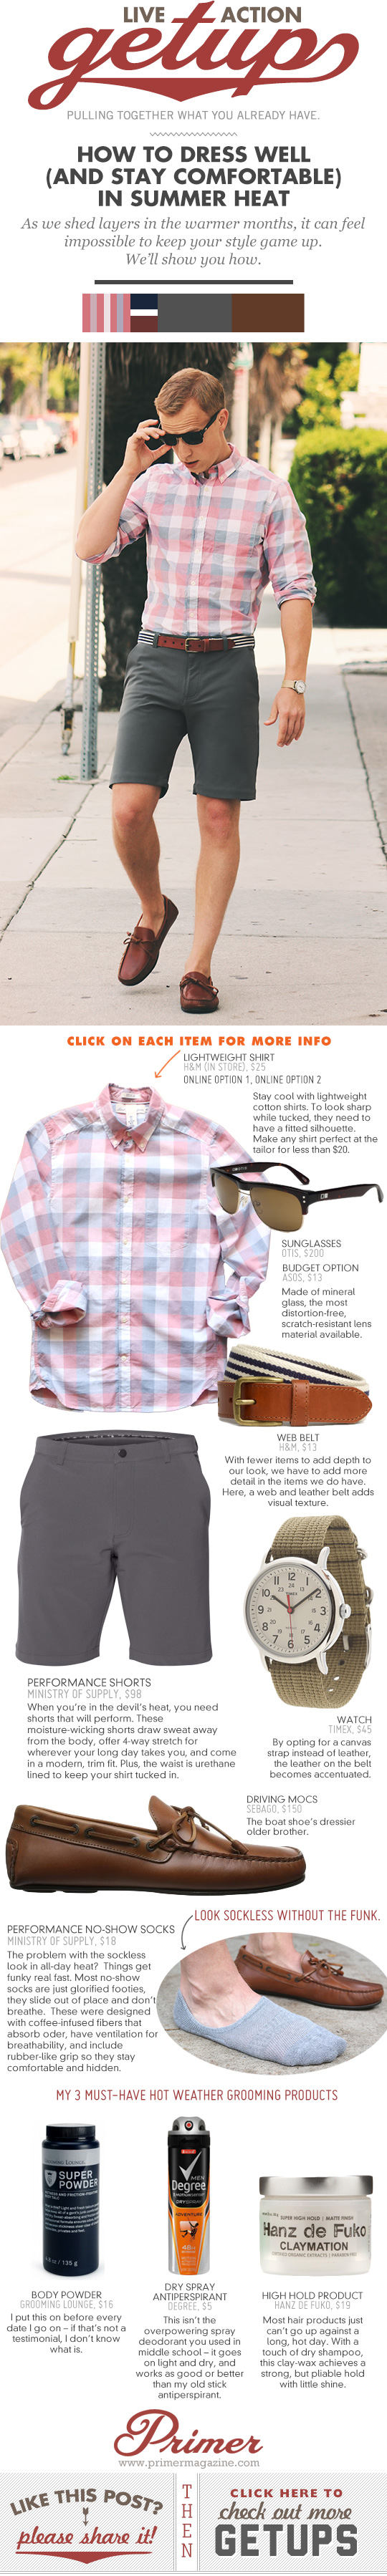 Getup - How to Dress Well in Summer - Pink check shirt, gray shorts, driving mocs